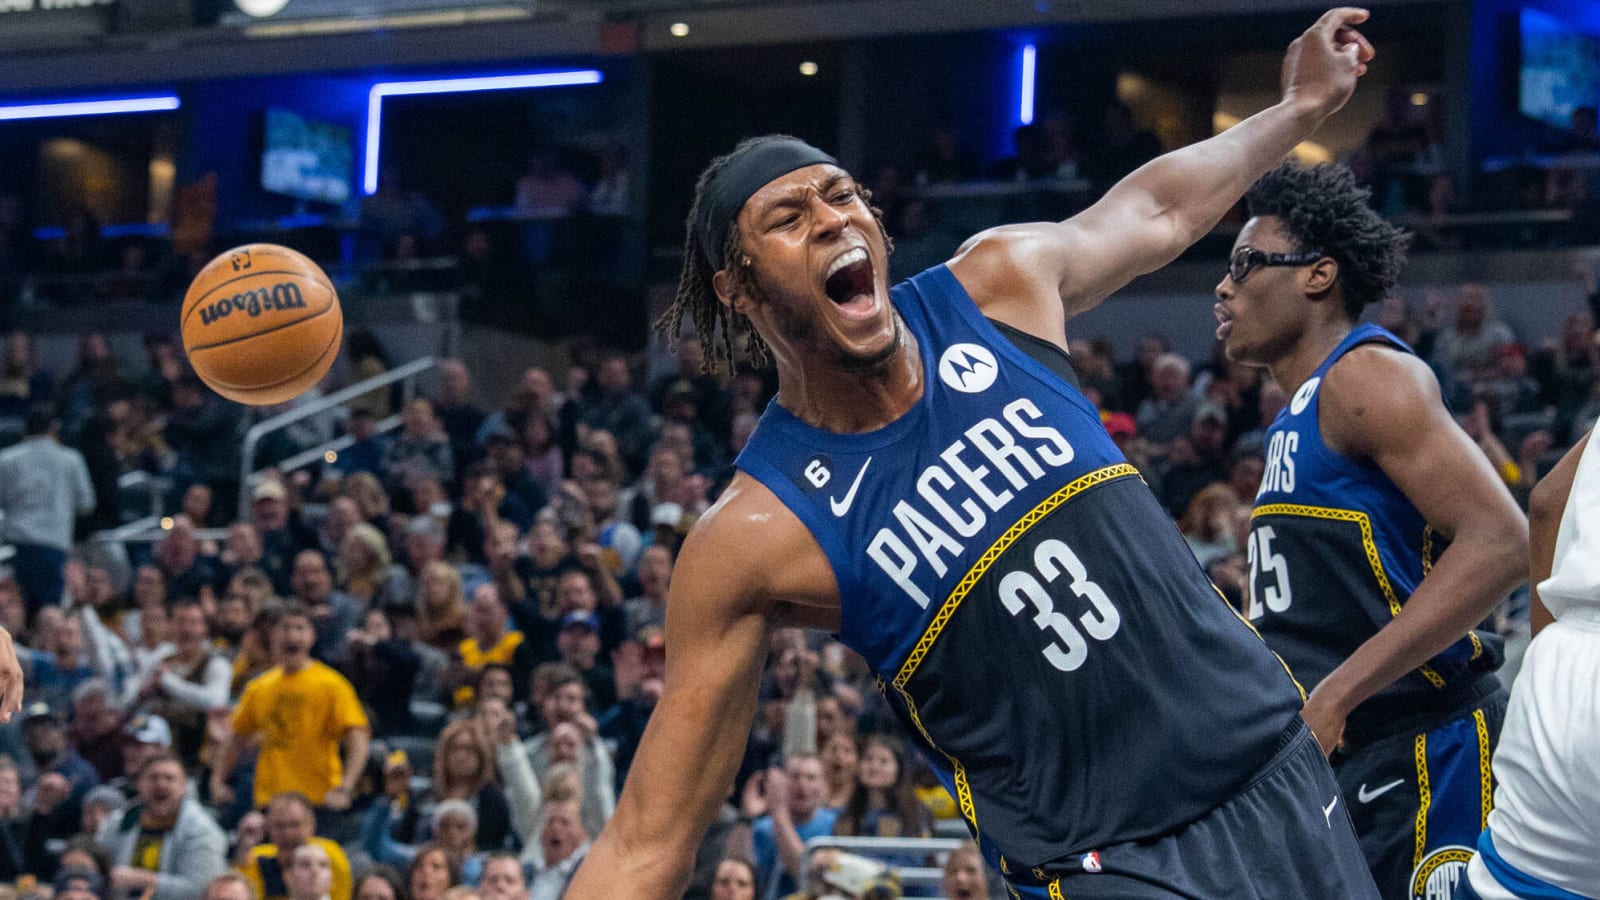 Watch: Pacers C Myles Turner trends on Twitter for monster dunk